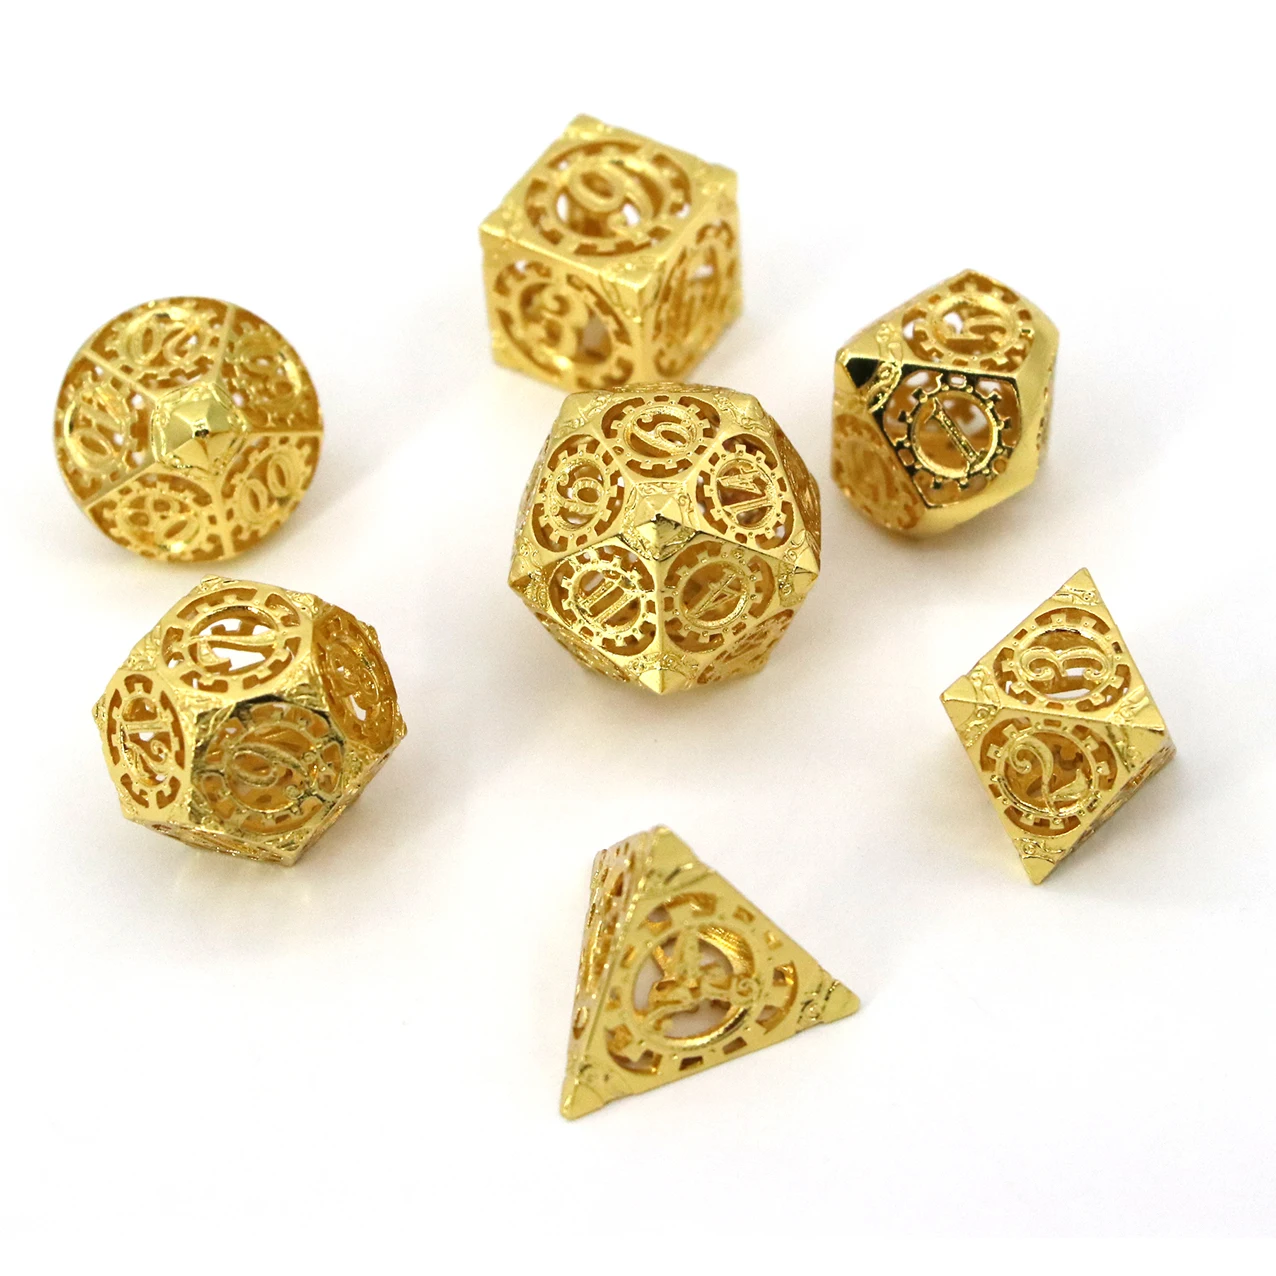 

Copper Hollow Metal Dice Set DND dice Dungeons and Dragon d&d polyhedral dice with Role Playing Games, Colorful